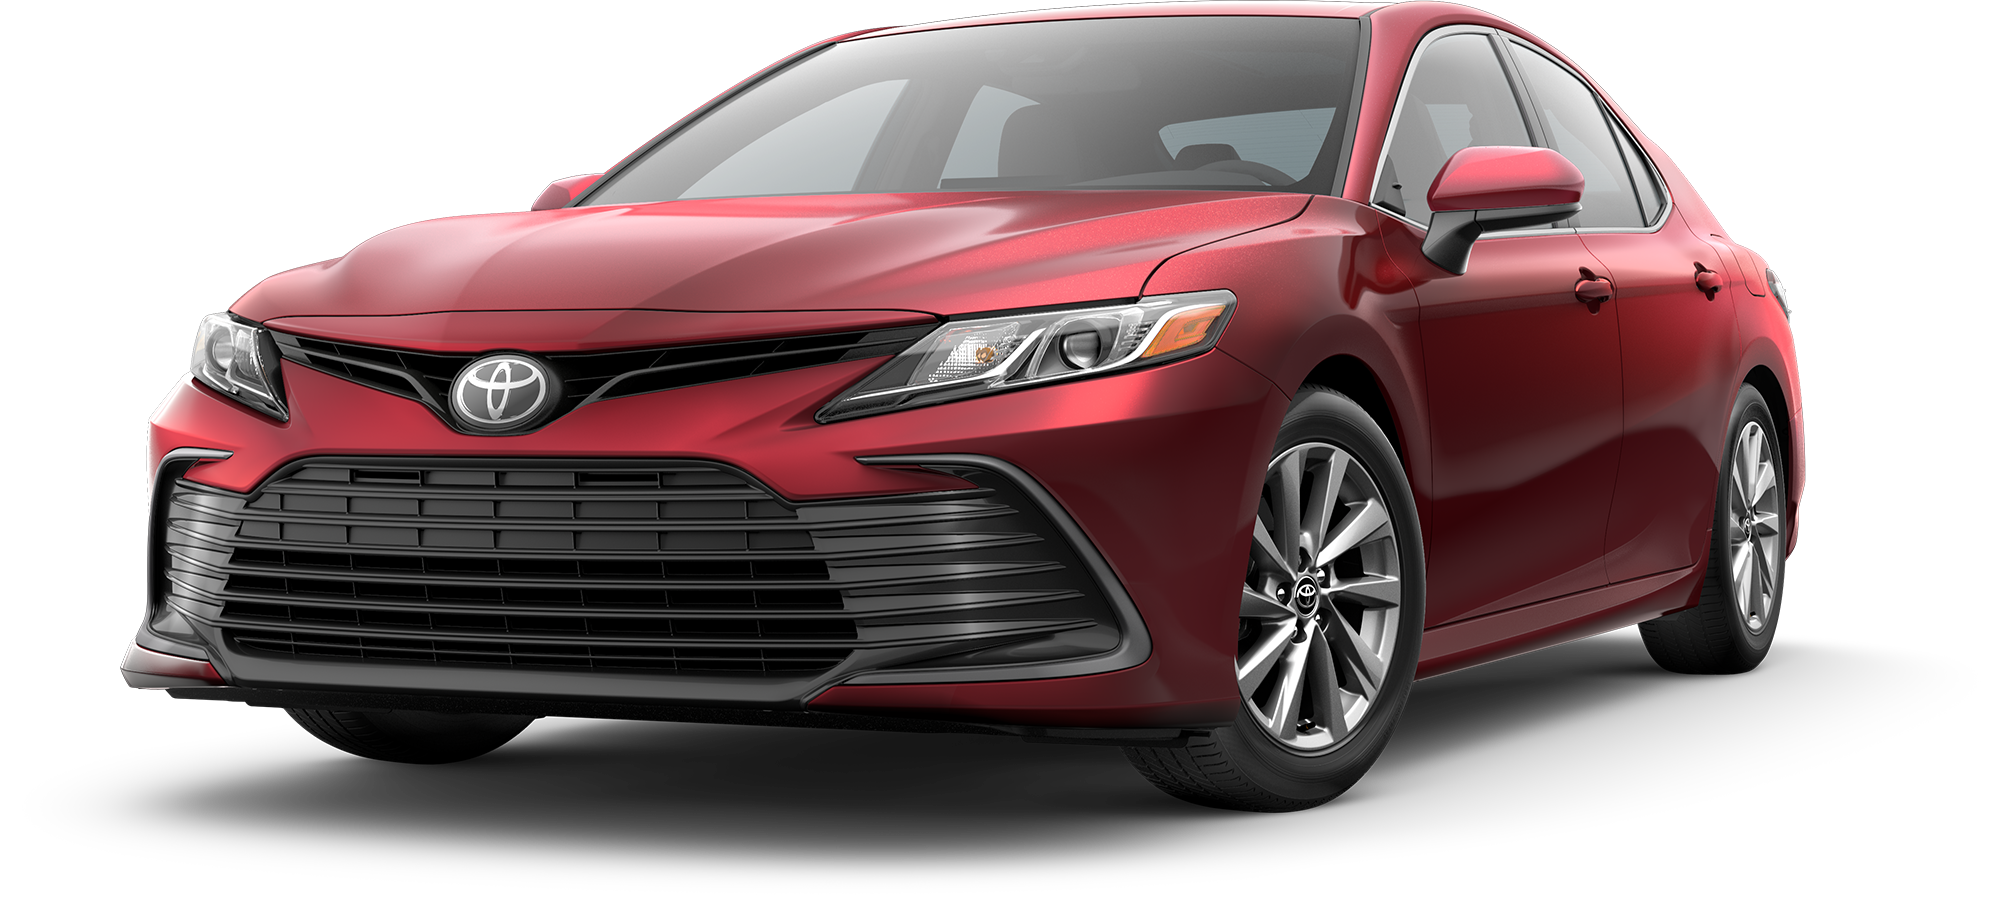 Save Money On A New Toyota Camry With Our Lease Deals Paul Miller